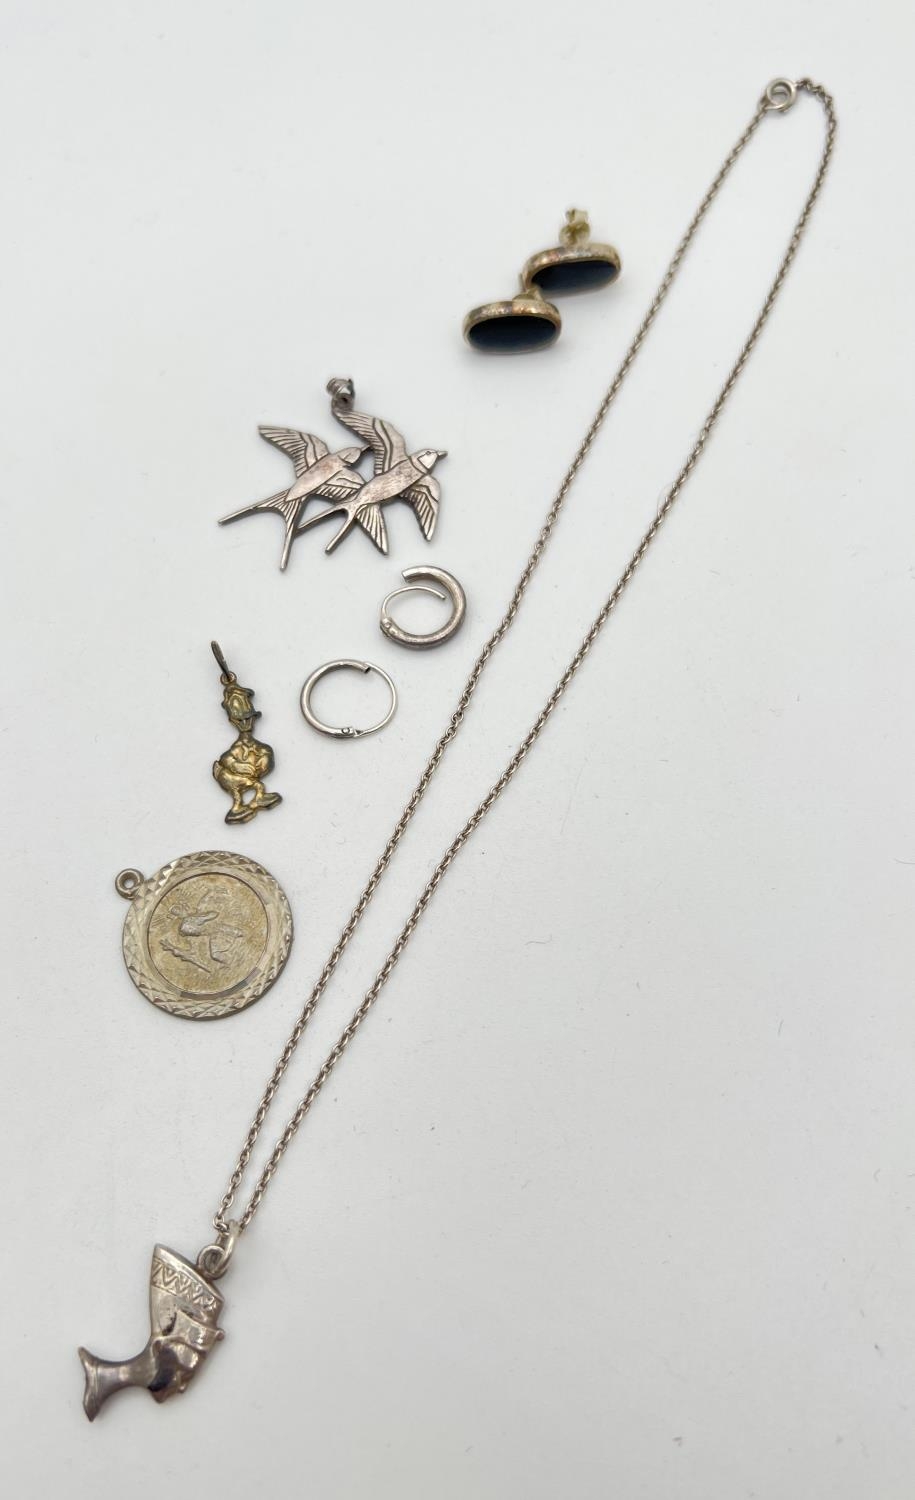 4 items of silver and white metal jewellery to include Donald Duck pendant/charm, double swallow